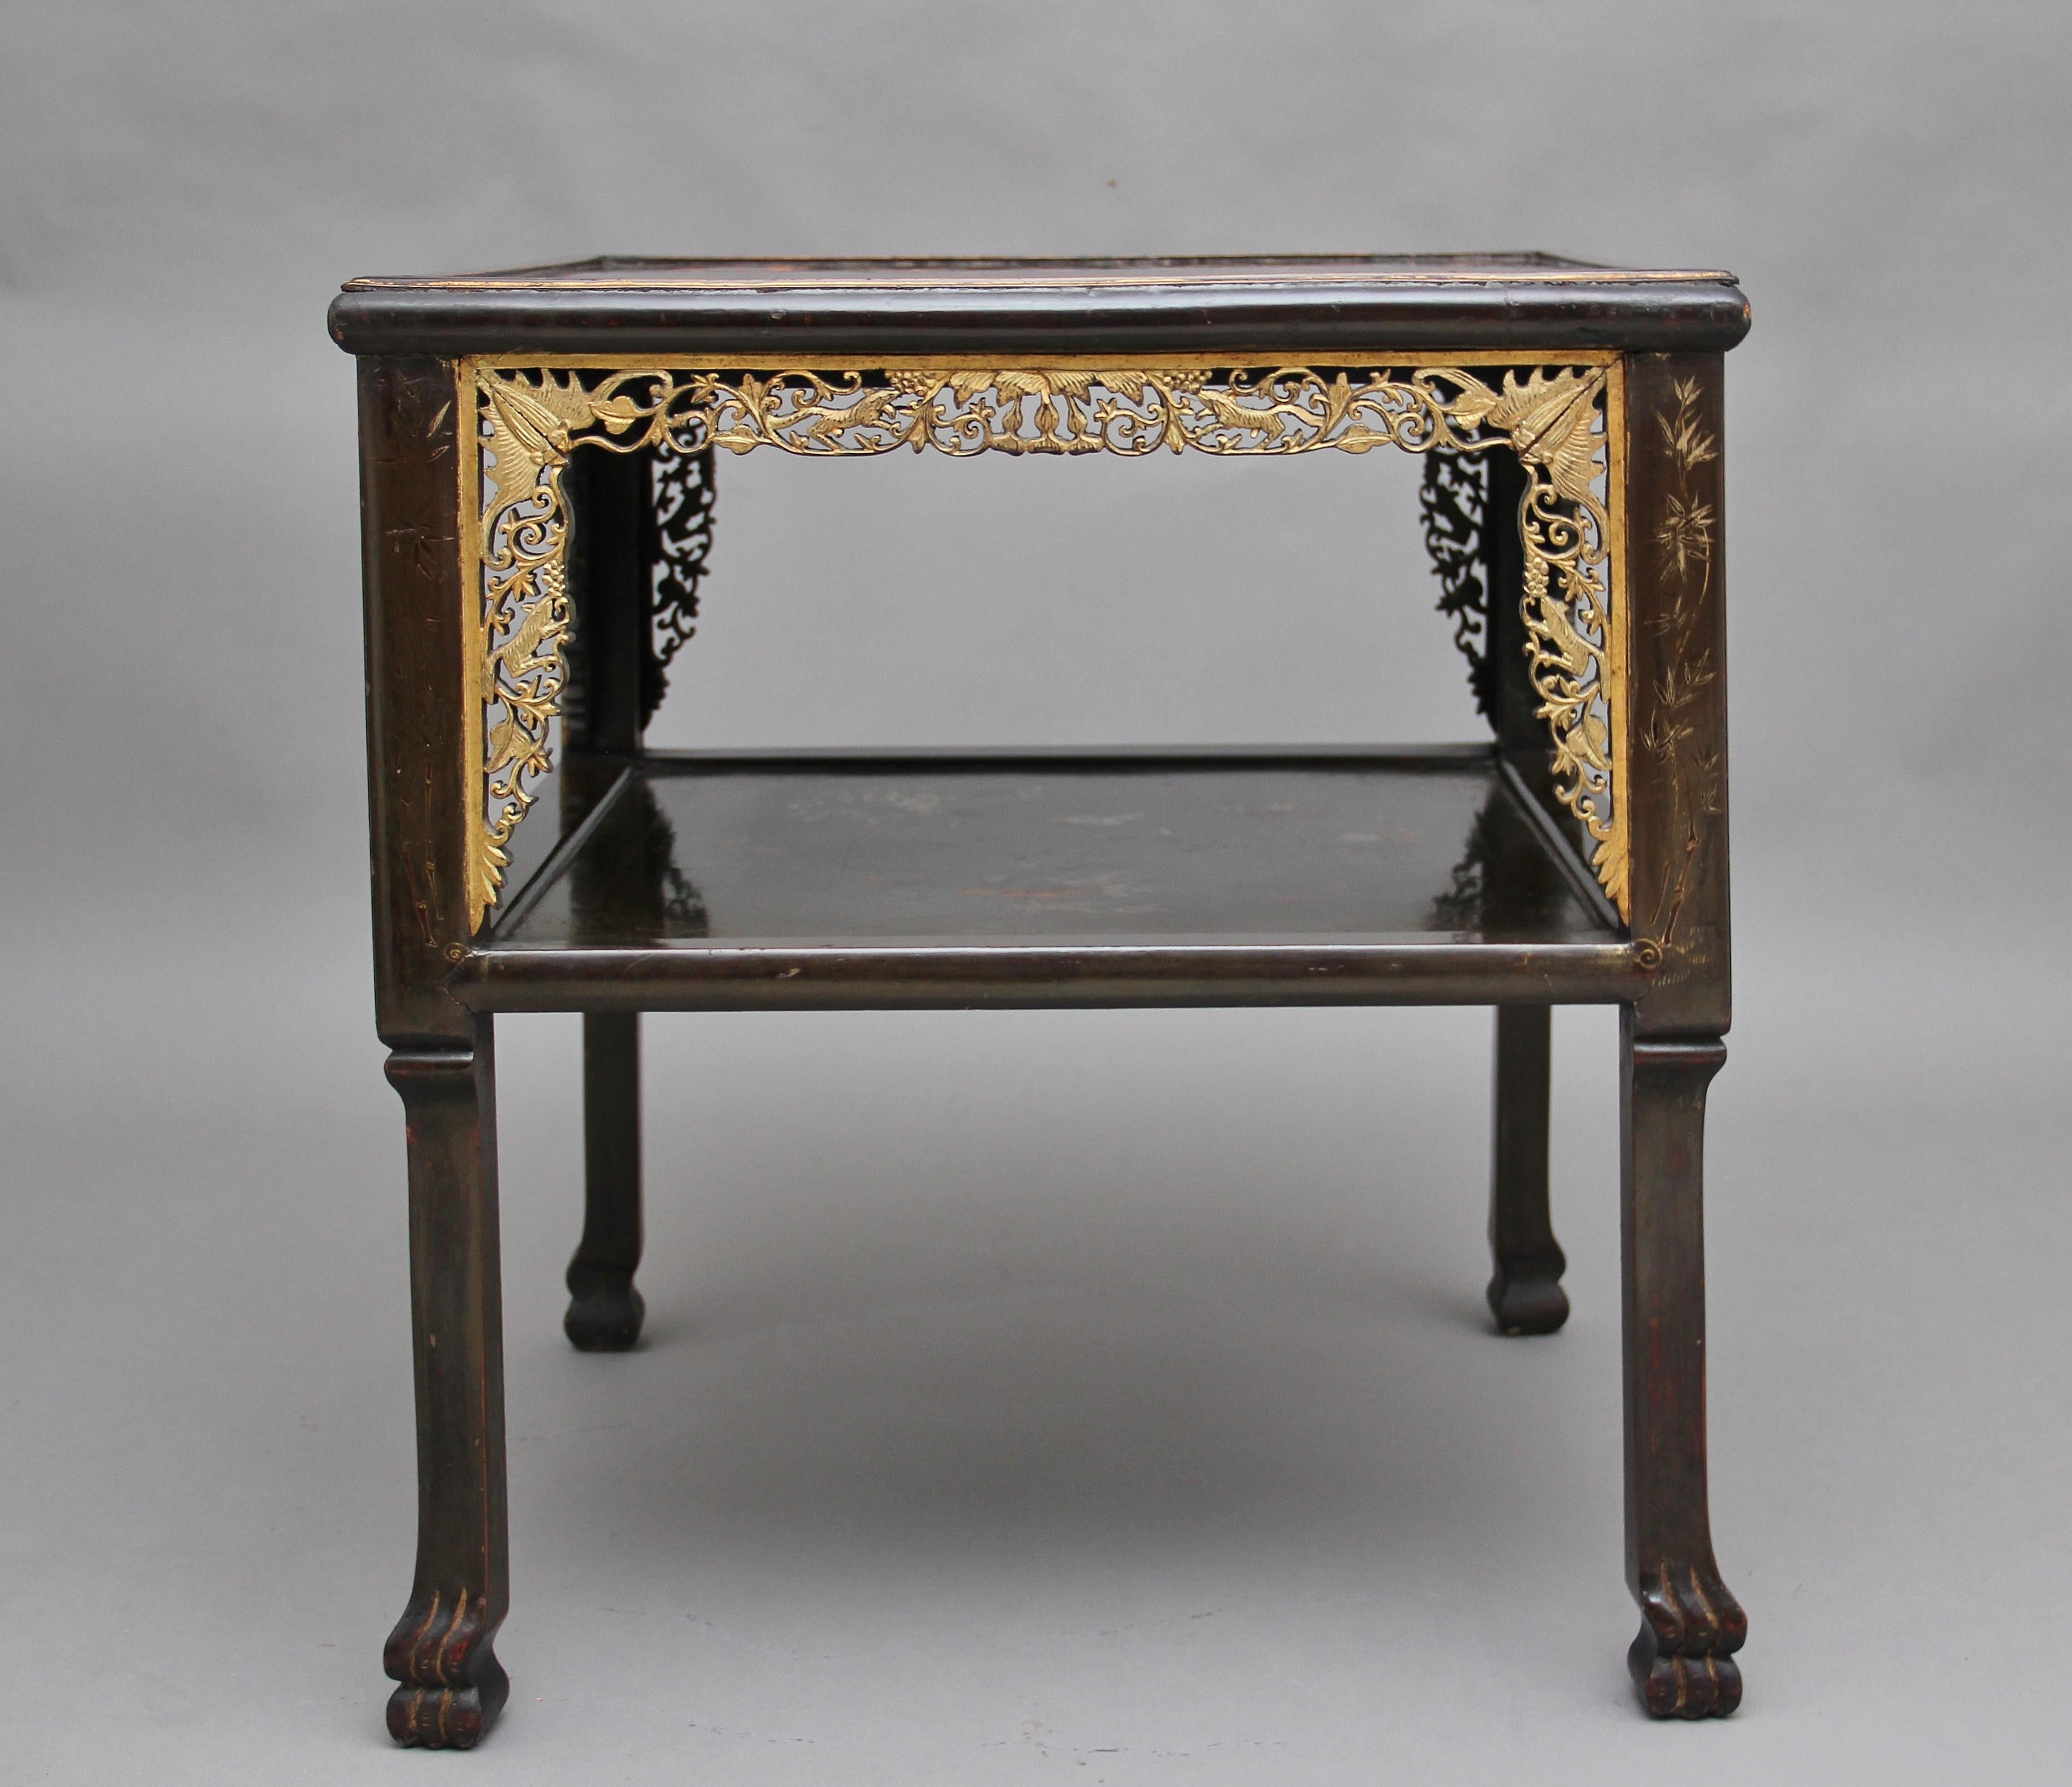 A decorative 19th century Chinese lacquered two-tier occasional table, the square top having lovely floral pattern decoration and this is also the same on the shelf below, each side having detailed carved and gilt fret work, supported on square legs